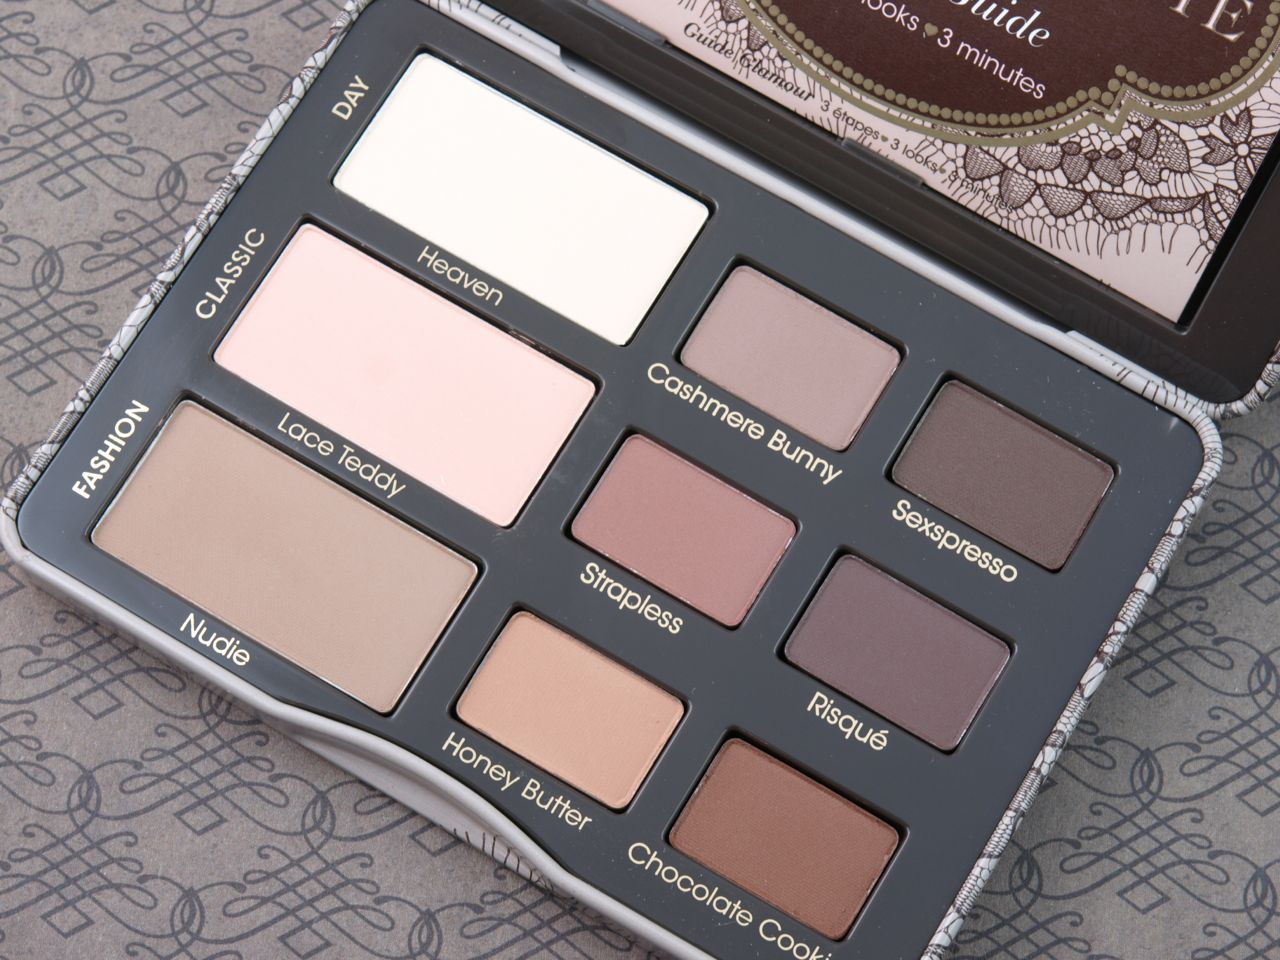 Too Faced Natural Matte Eye Palette Review and Swatches